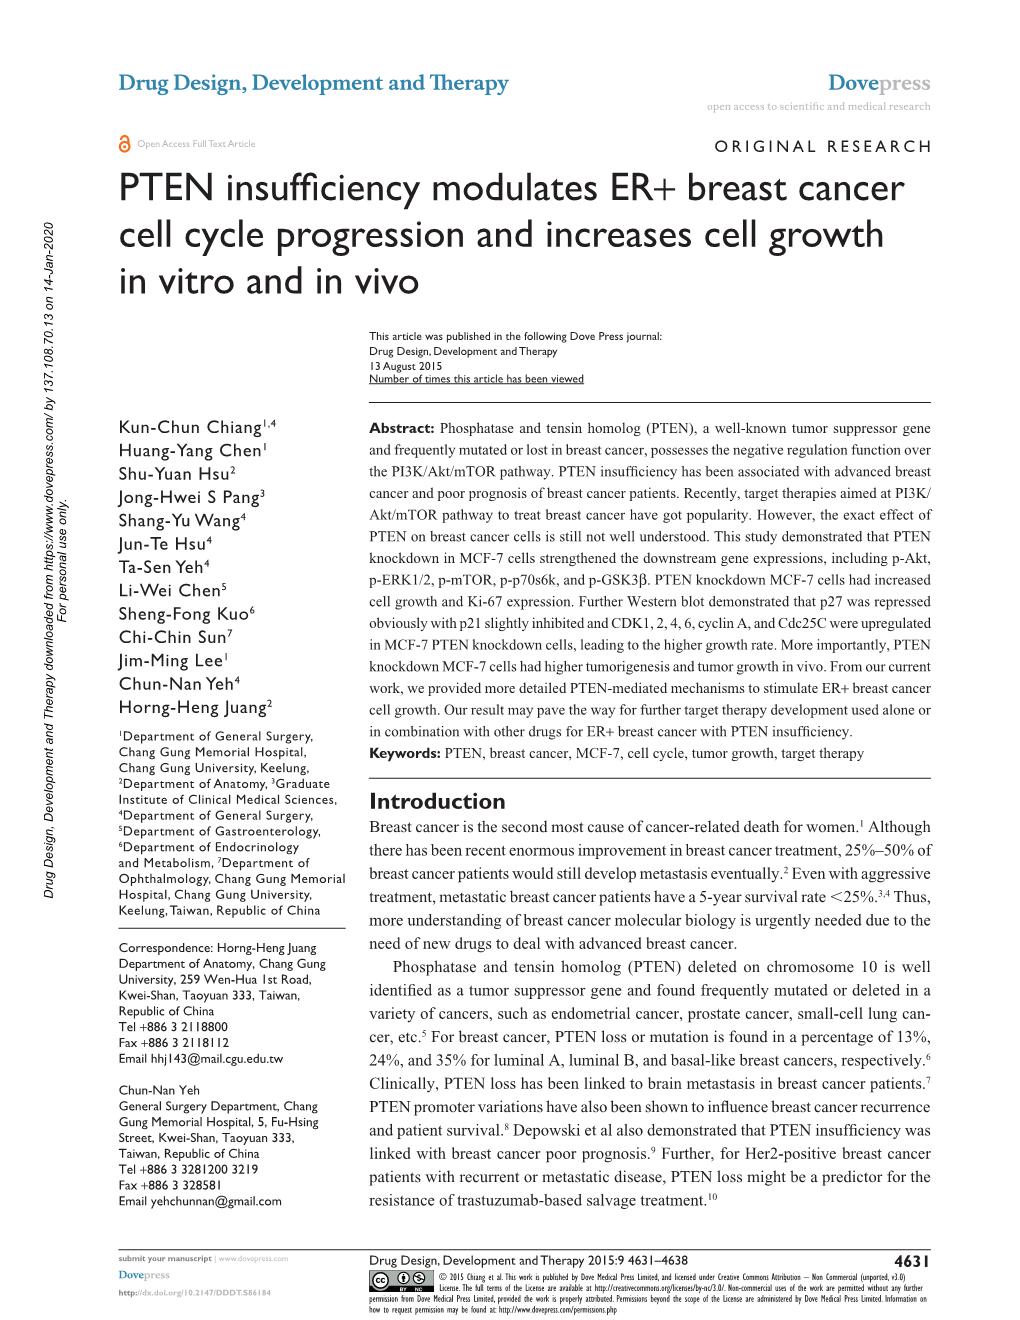 PTEN Insufficiency Modulates ER+ Breast Cancer Cell Cycle Progression and Increases Cell Growth in Vitro and in Vivo